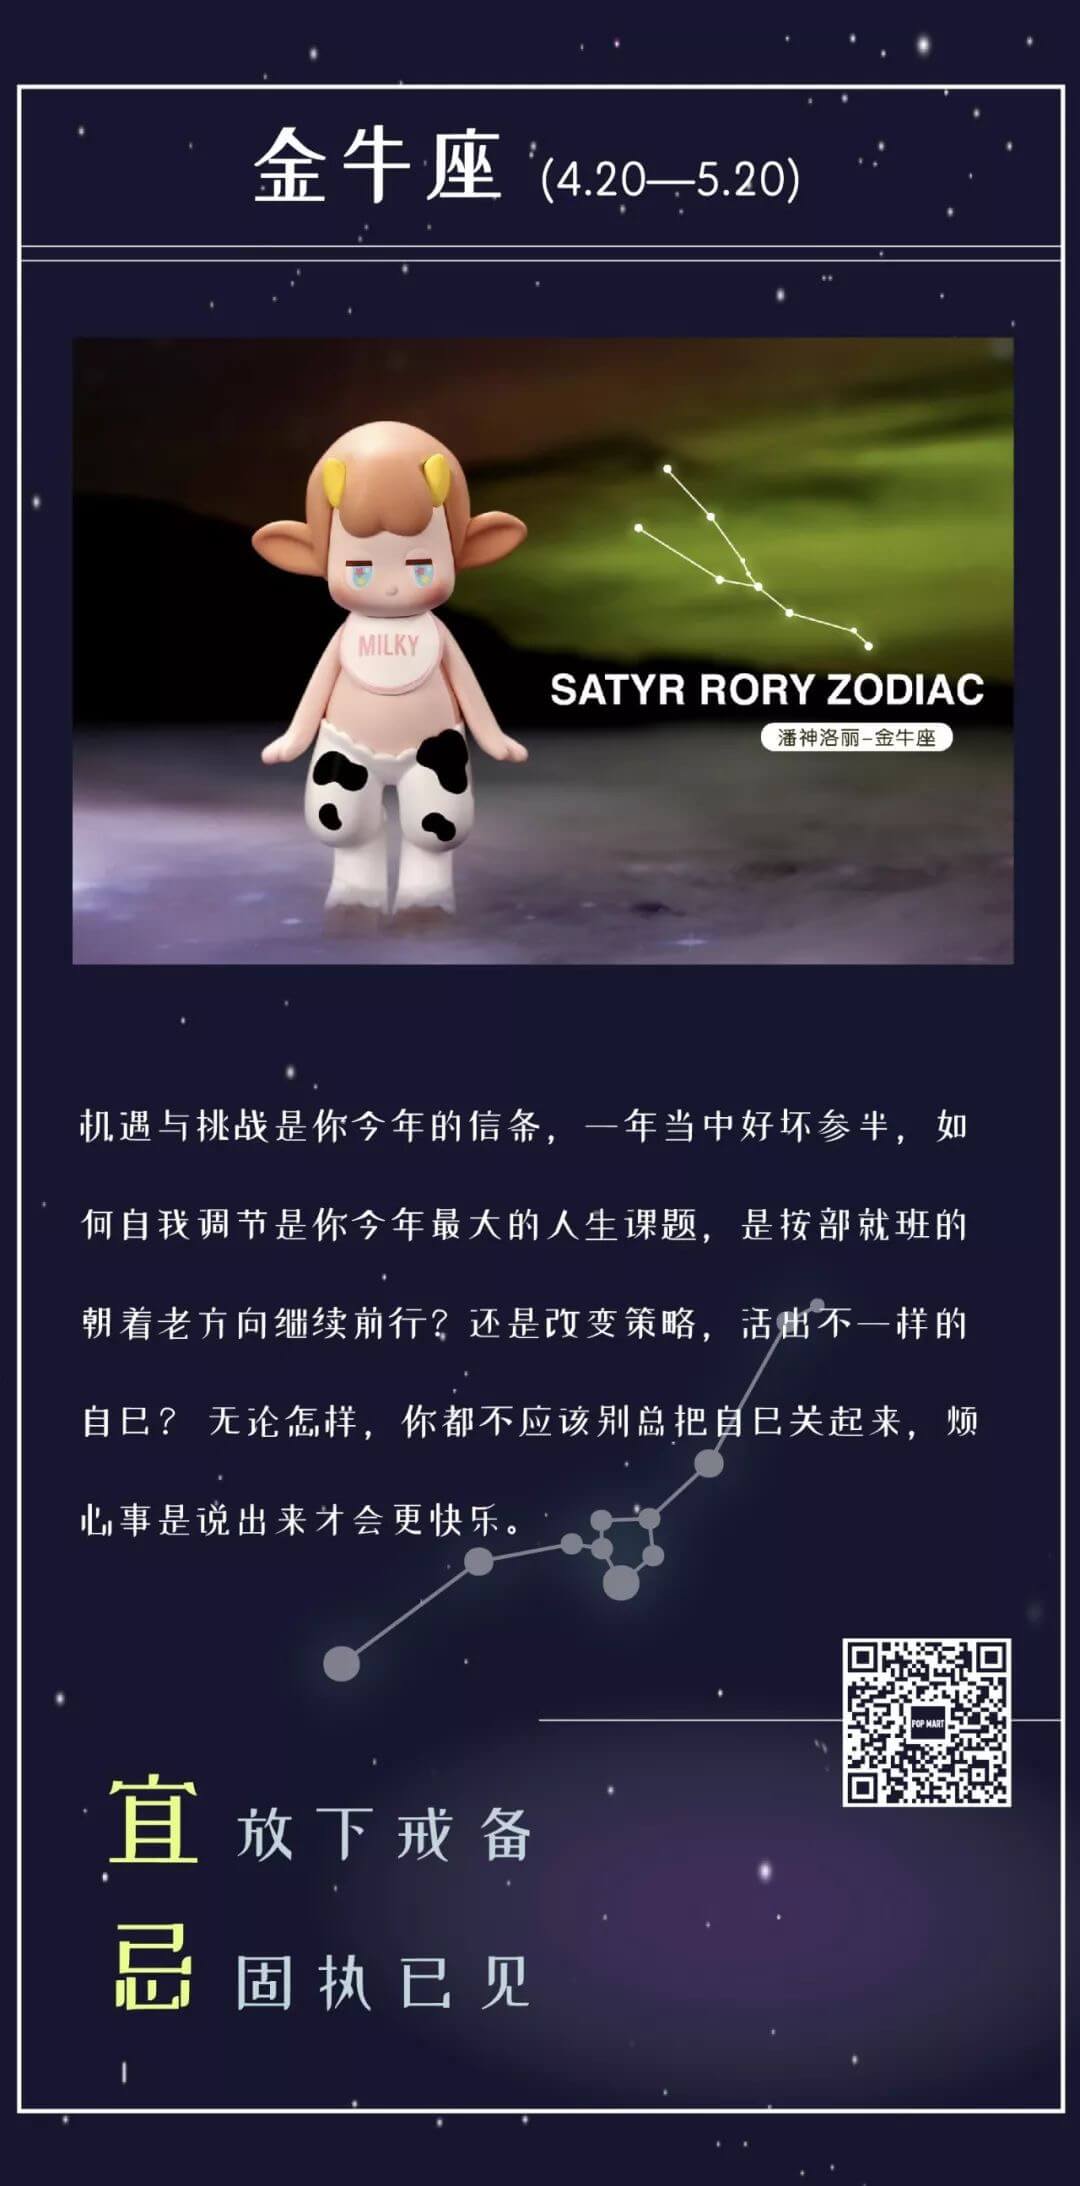 Satyr-Rory-Zodic-Edition-Mini-Series-by-Seulgie-Lee-x-POP-MART-the-toy-chronicle-Satyr-Rory-Zodic-Edition-Mini-Series-by-Seulgie-Lee-x-POP-MART-the-toy-chronicle-